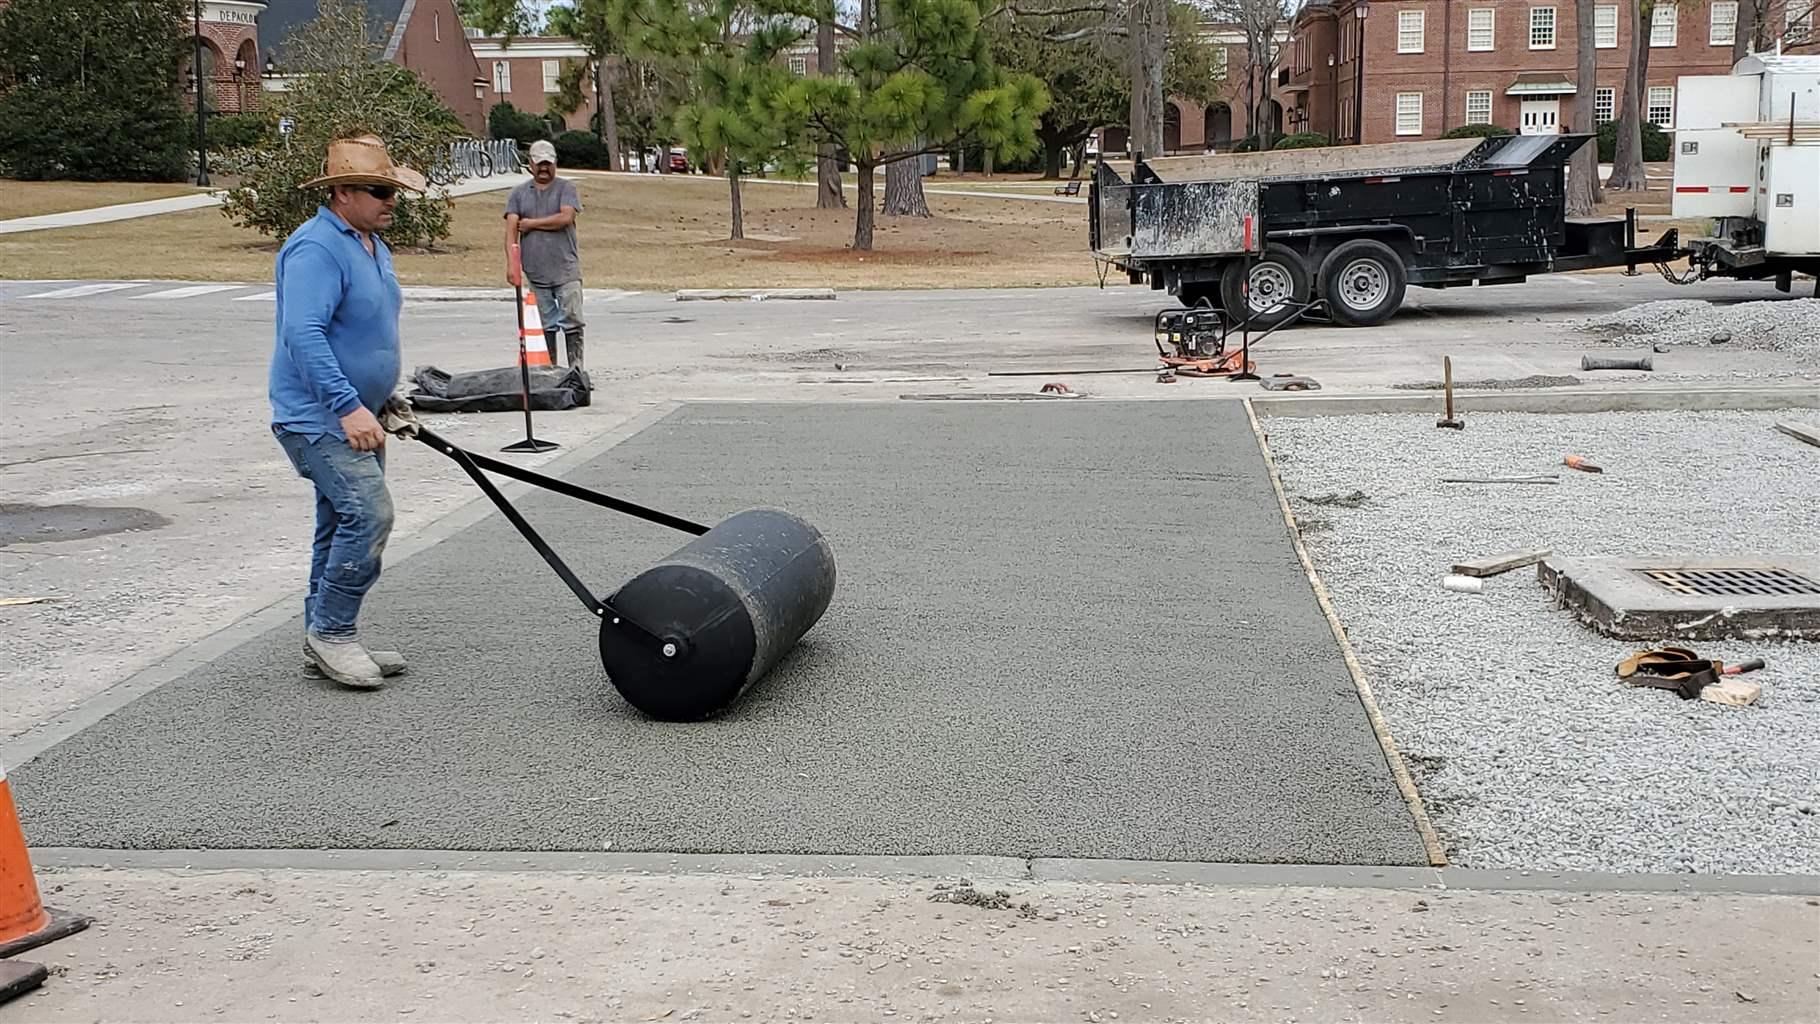 Workers replace sections of a parking lot at the University of North Carolina Wilmington (UNCW) with permeable pavement that allows rainfall to seep into the ground to reduce stormwater runoff. 